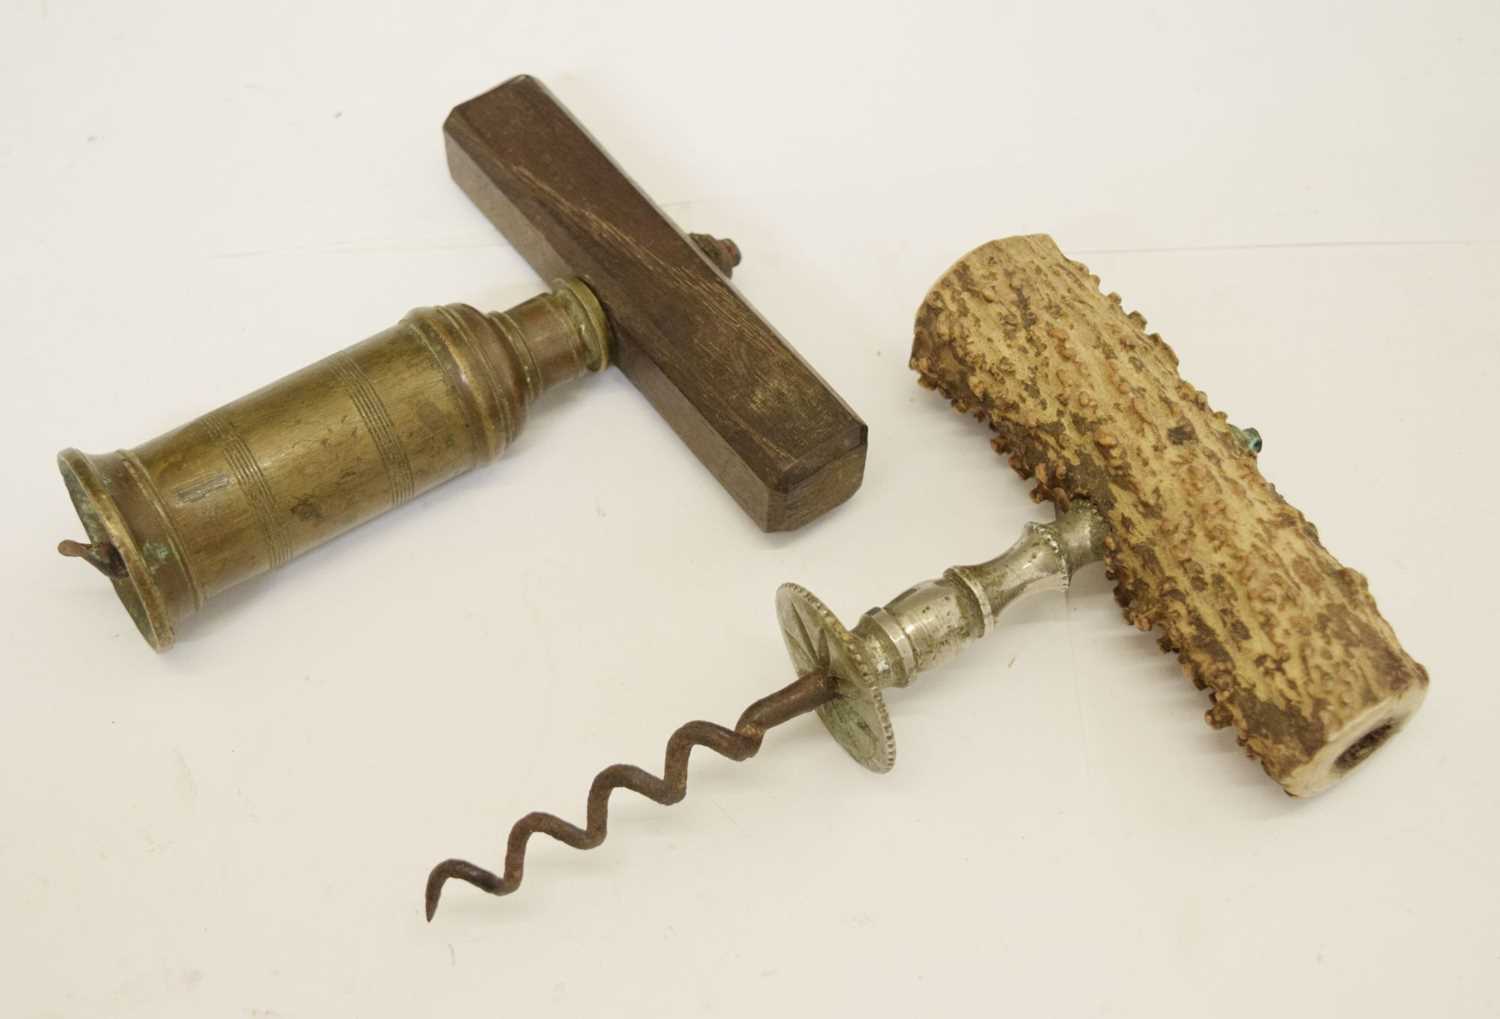 19th century Thomason-type brass corkscrew and one other